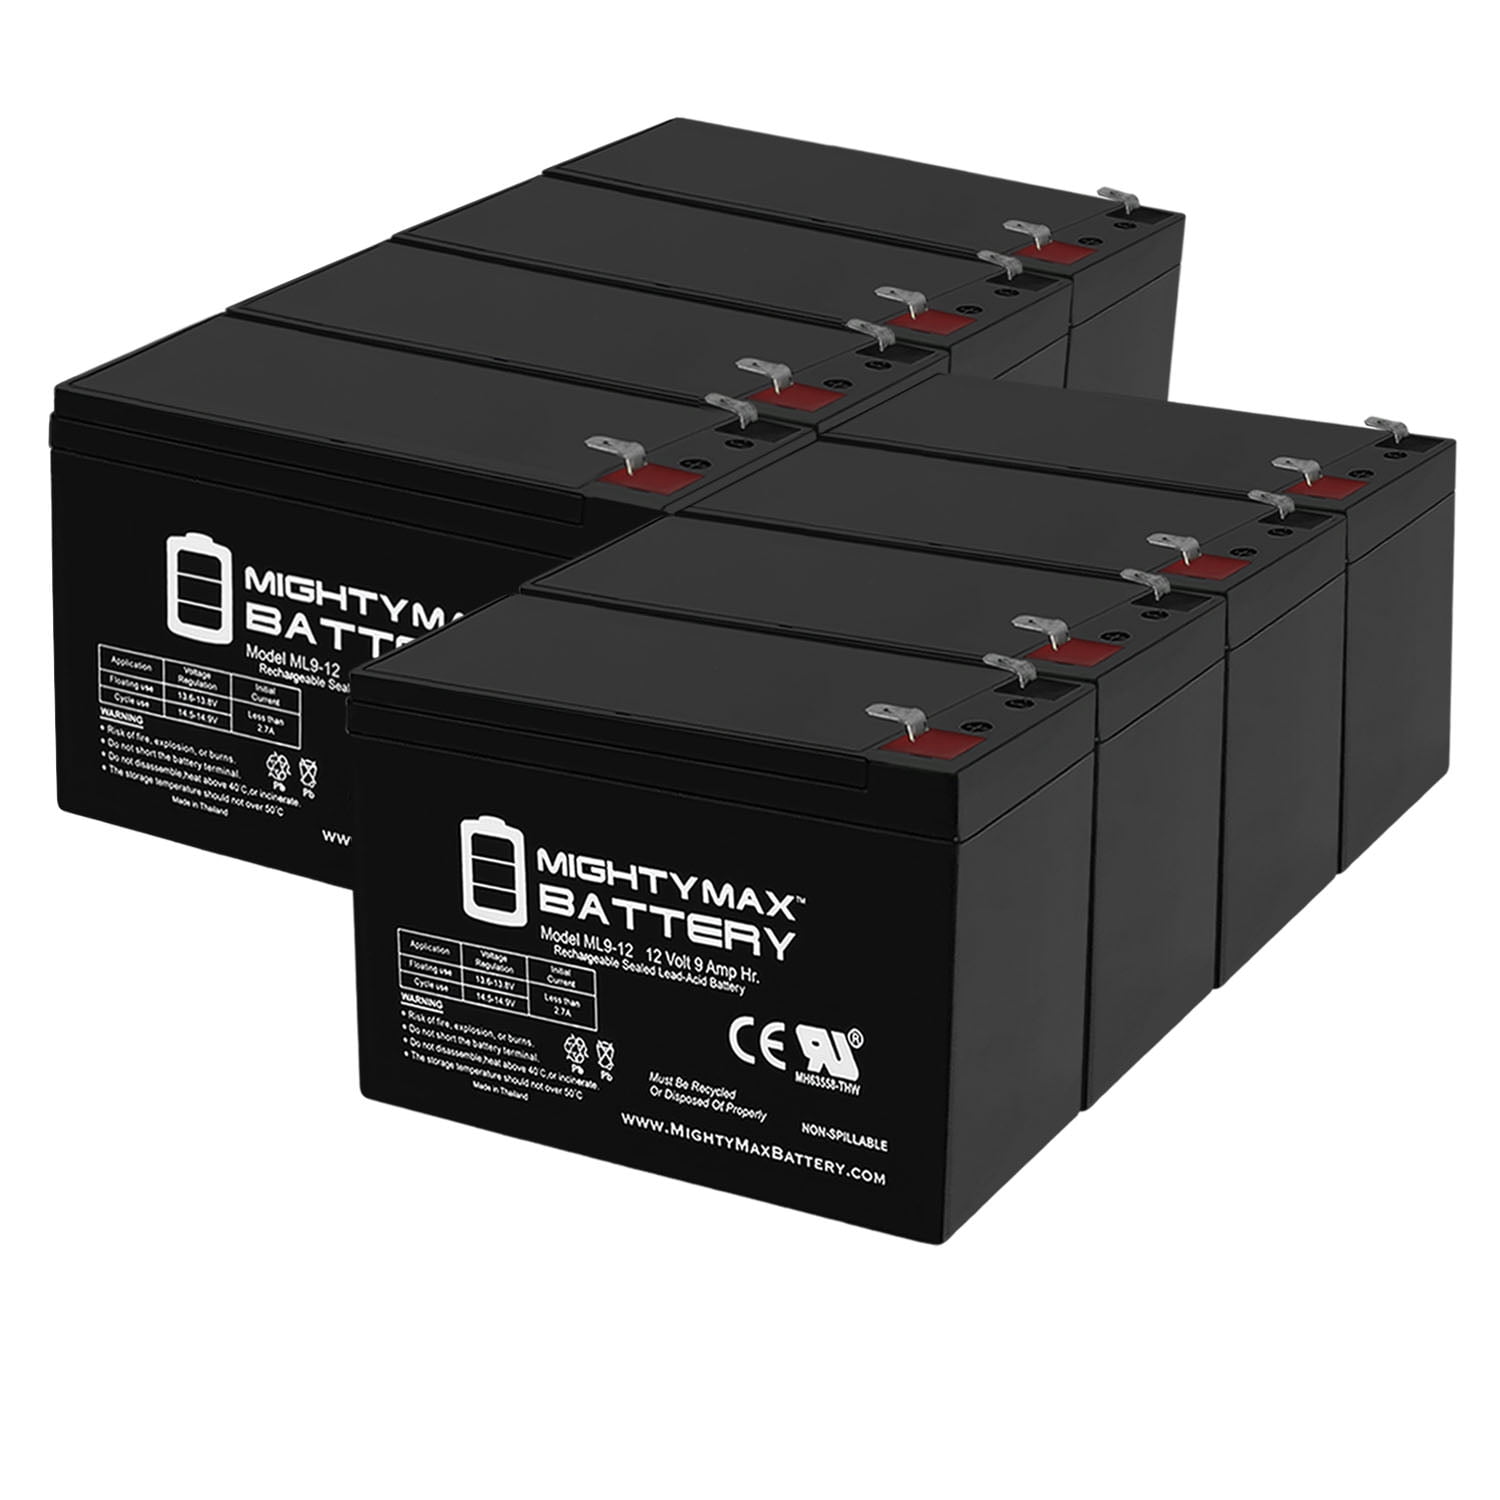 UPG 12V 9AH Battery for Vexilar Double Vision Pack WITH CHARGER 